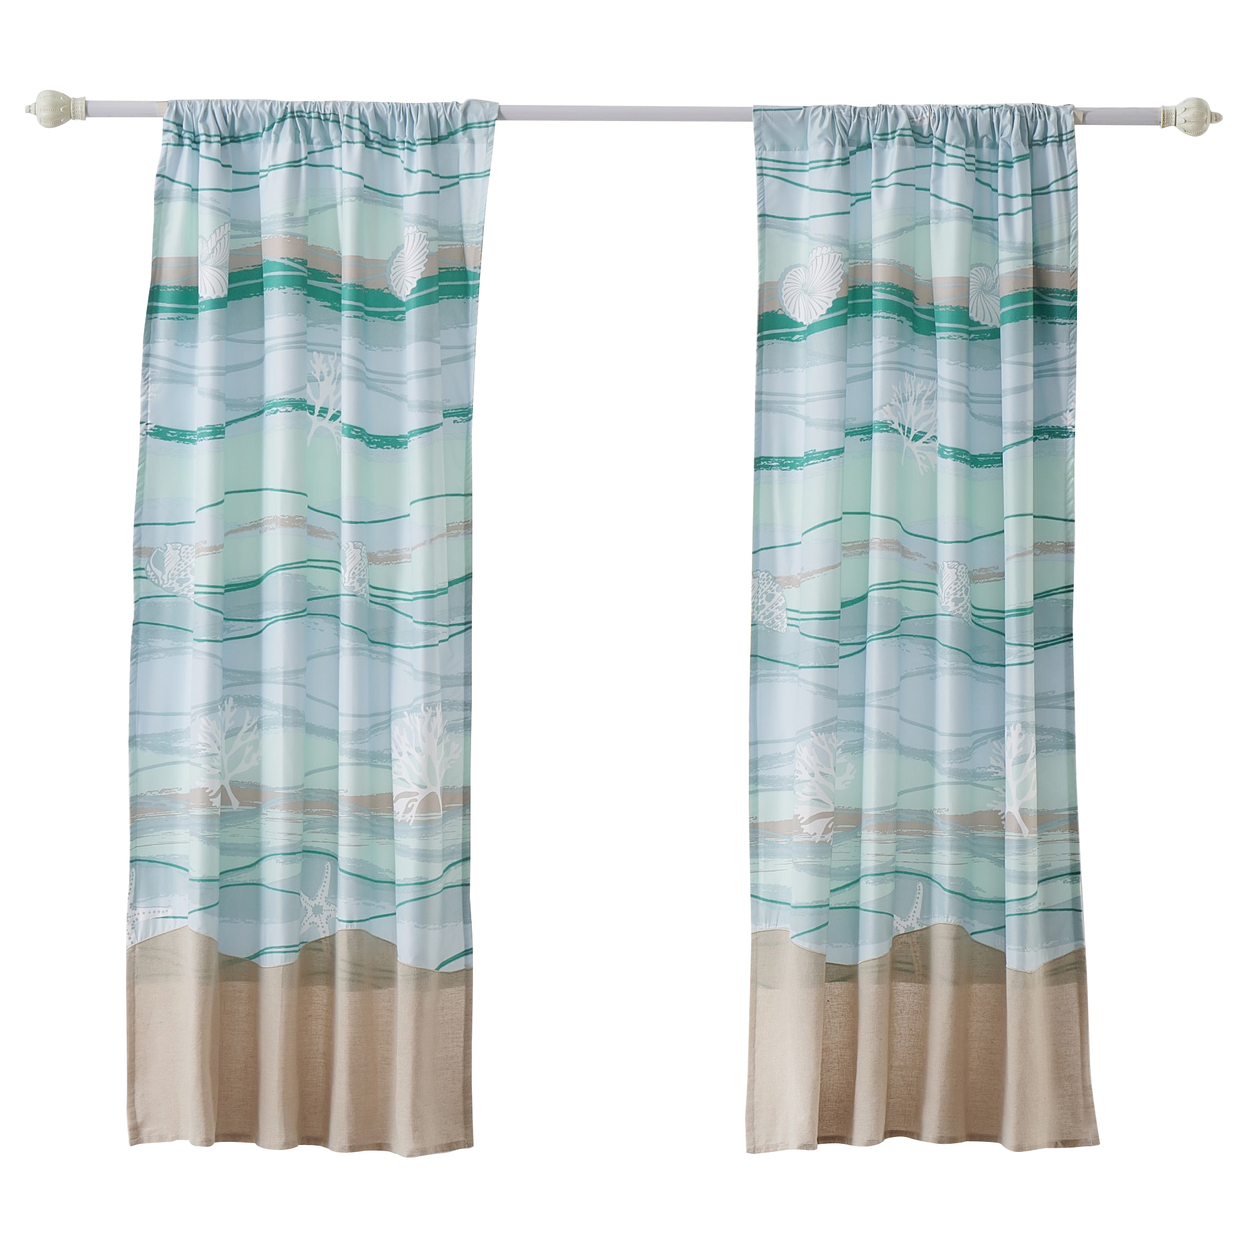 Vira 63 Inch Window Curtains, Ocean Waves And Sand Print, Rod Pockets